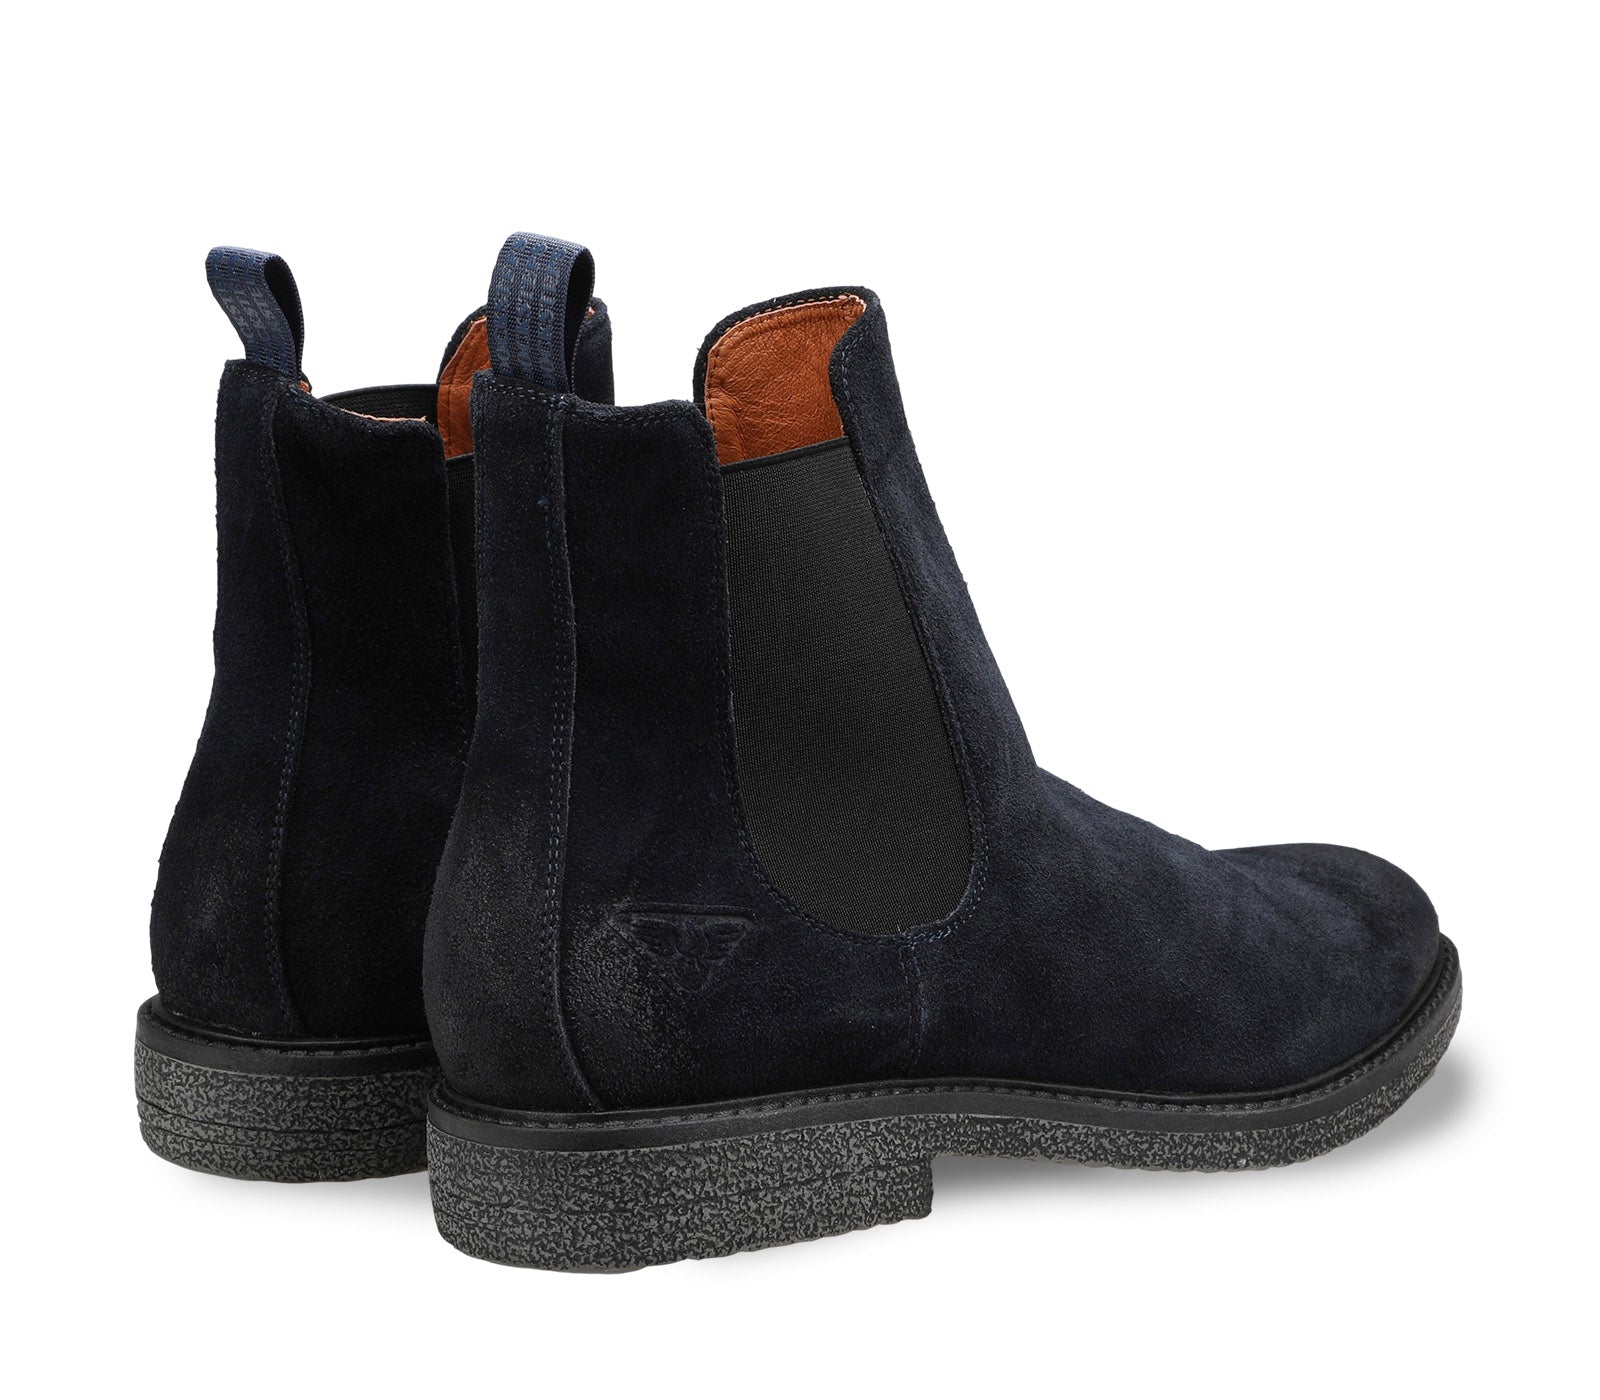 Men's Chelsea Ankle Boots in Suede with Elasticized Inserts